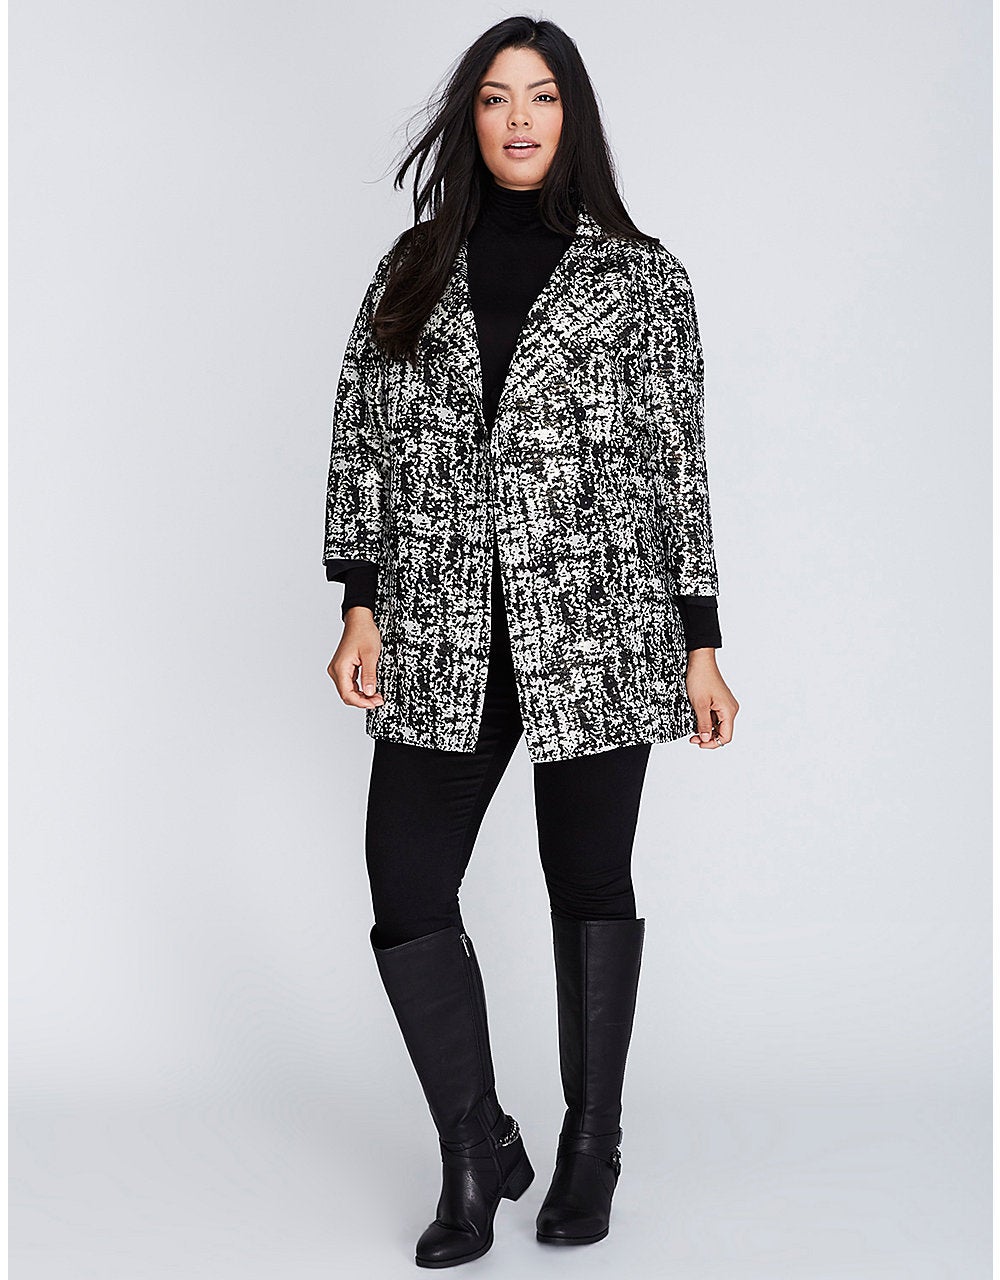 15 Head-Turning Coats Perfect For Curvy Girls
